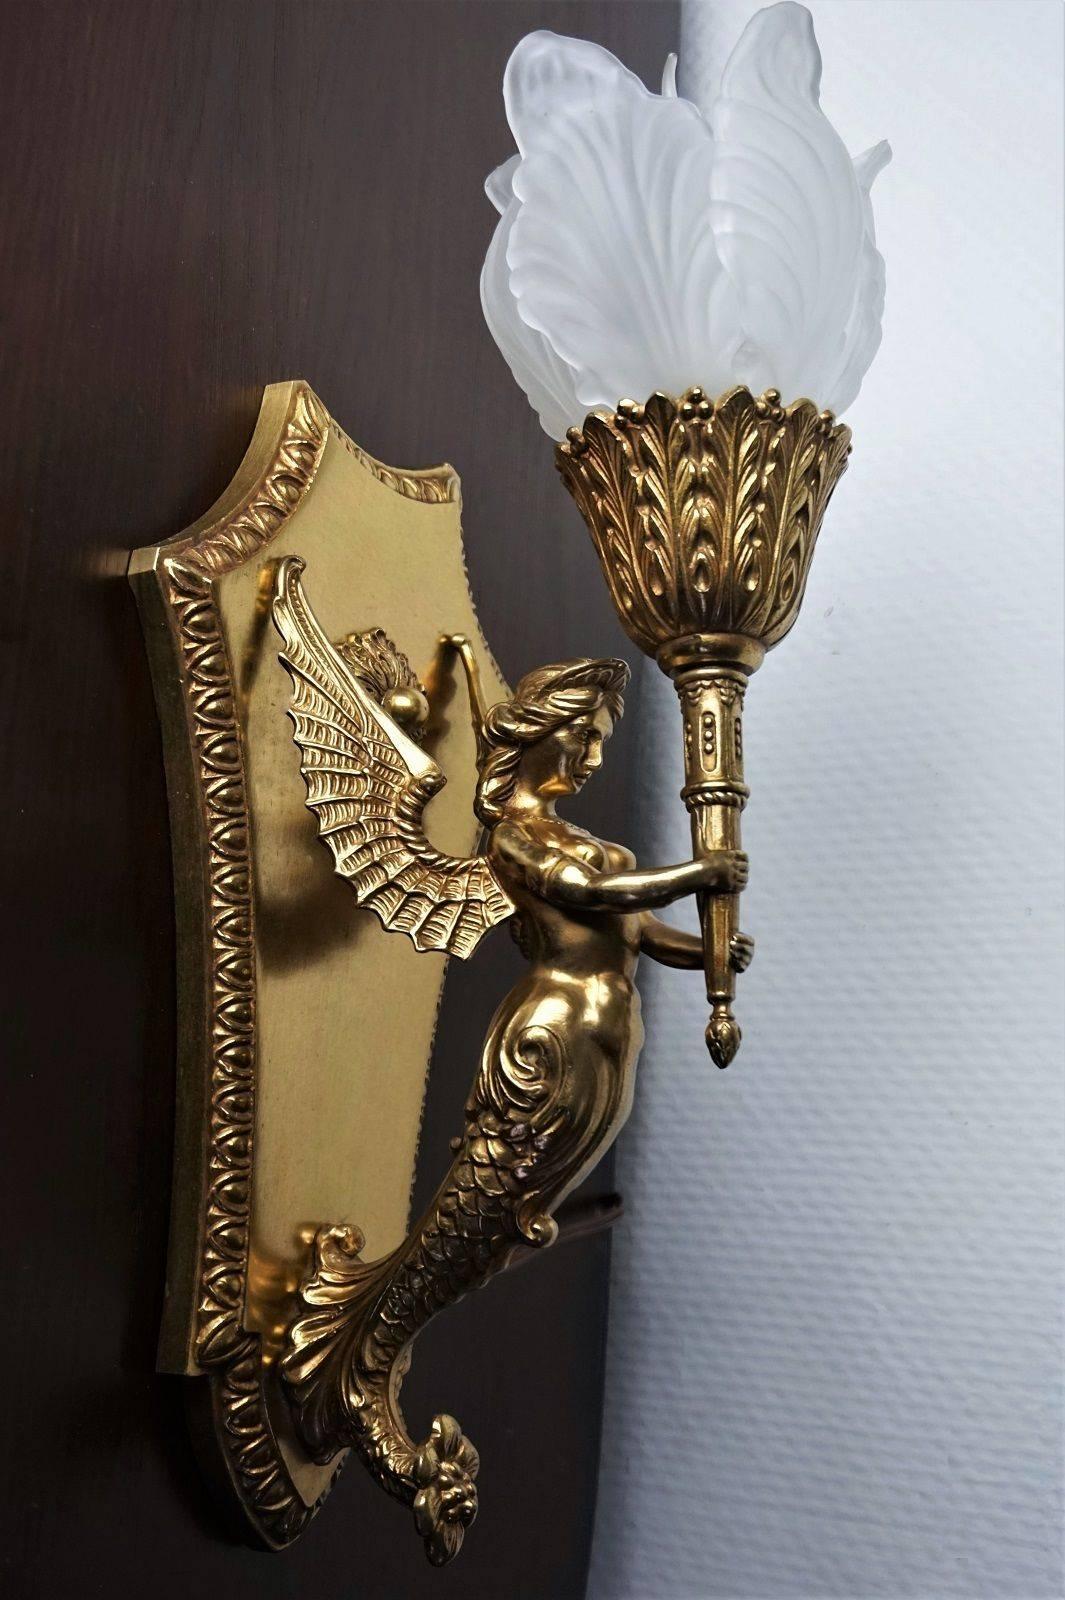 Heavy French Empire chased and gilt bronze winged figural wall sconce, France circa 1880-1890, with flower glass schade (the glass flower is composed of five separated petals).

This piece has been electrified at a later time.

Height with shade: 17